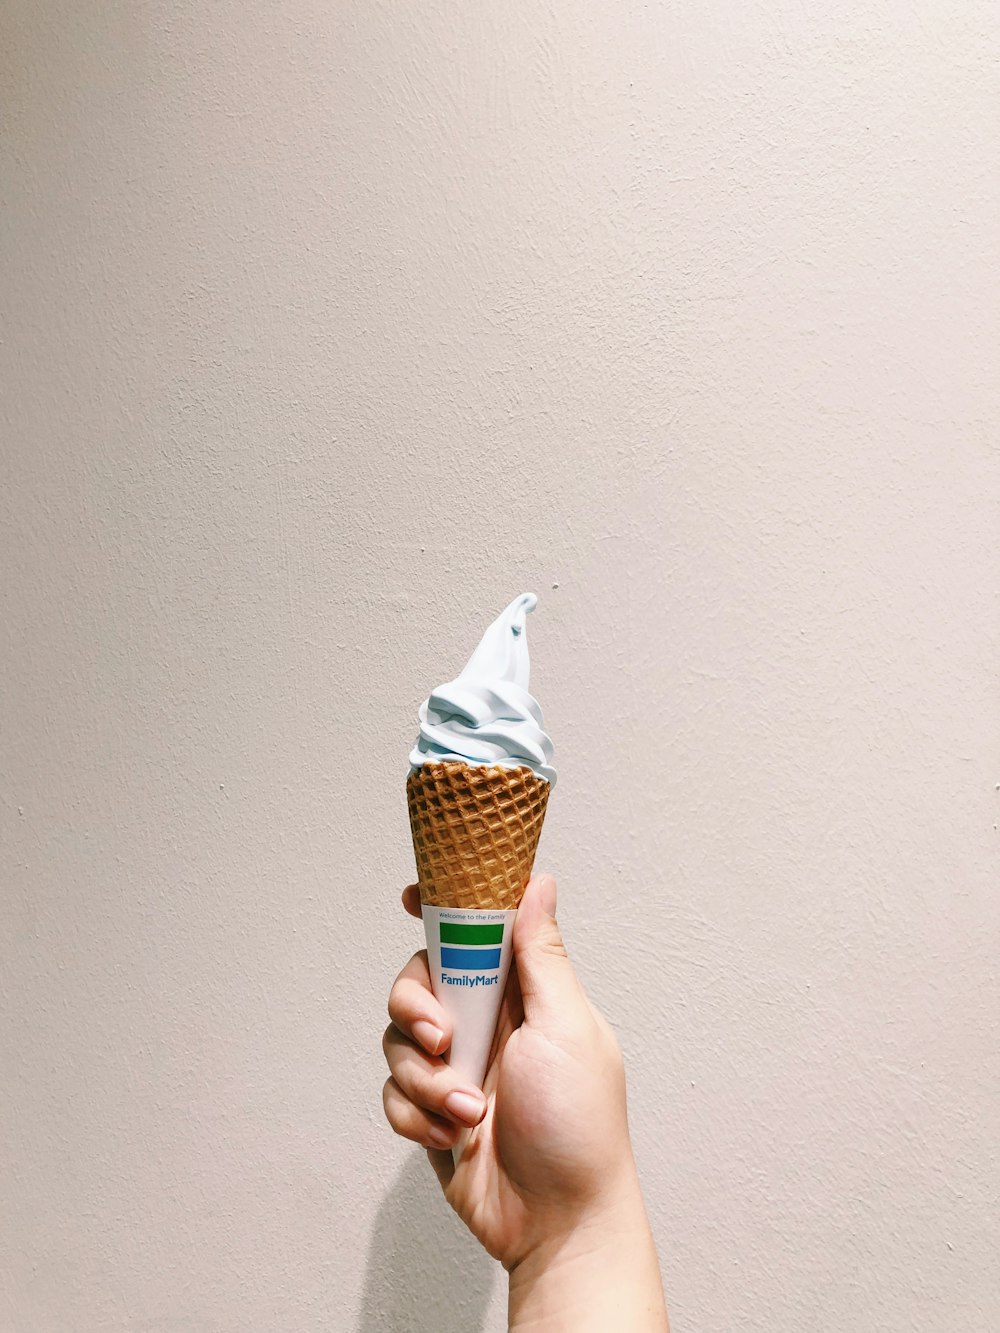 a hand holding a cone shaped ice cream cone